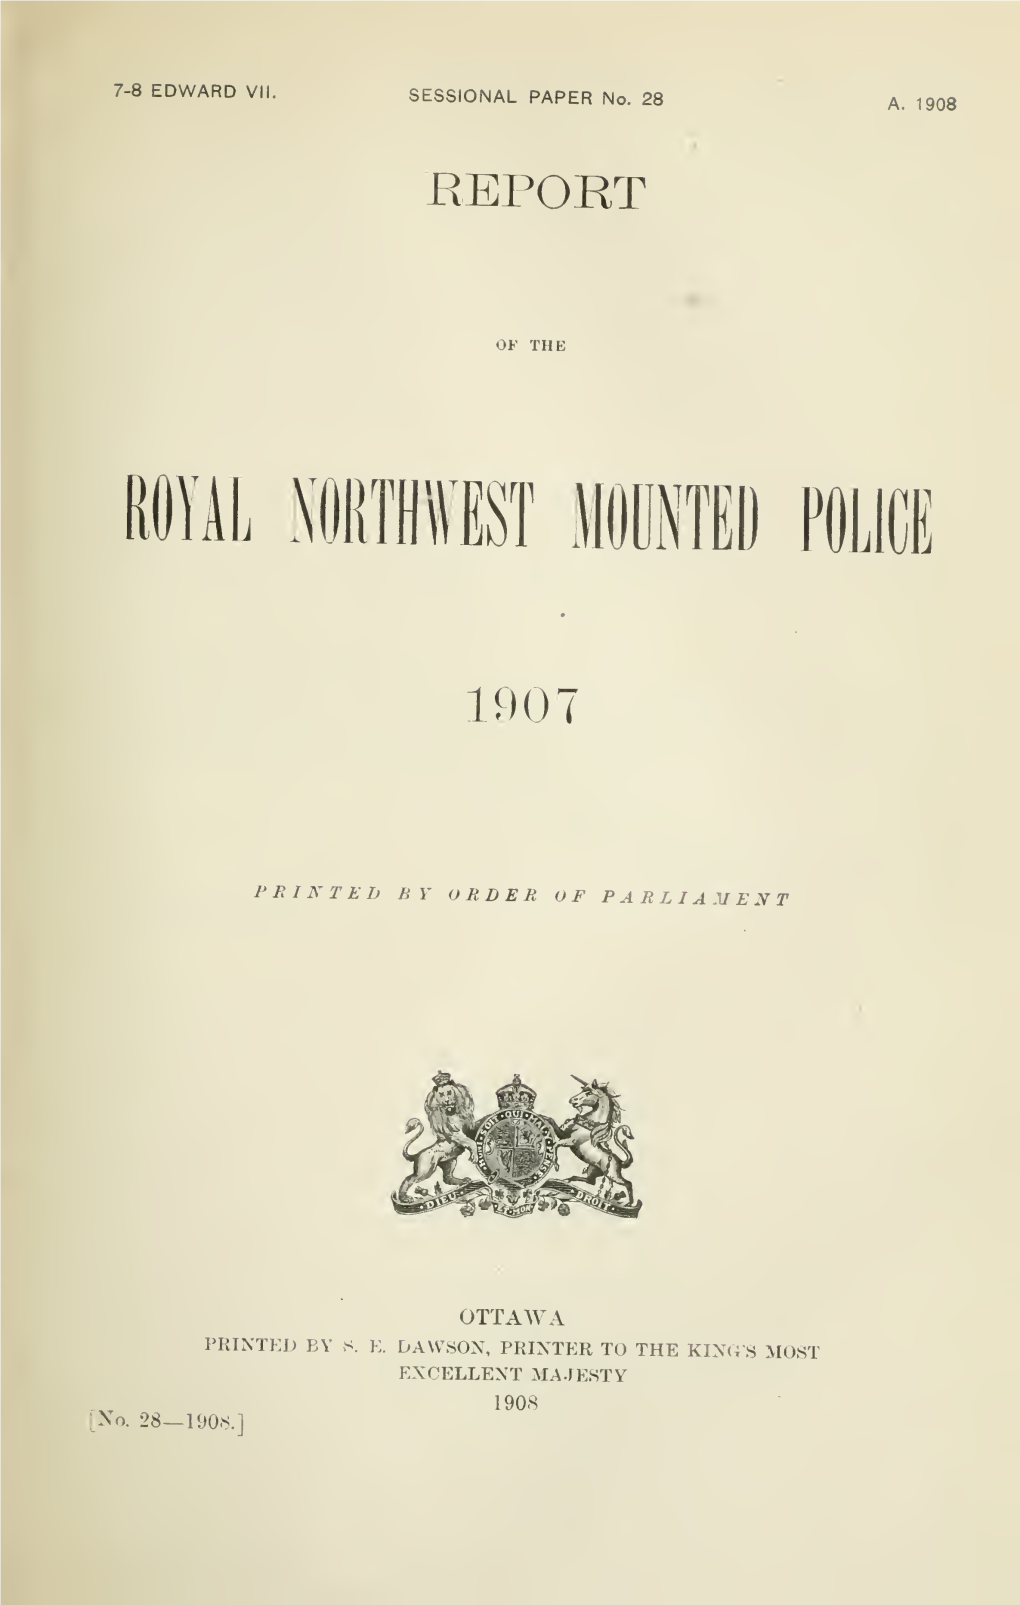 Report of the Royal Northwest Mounted Police, 1907